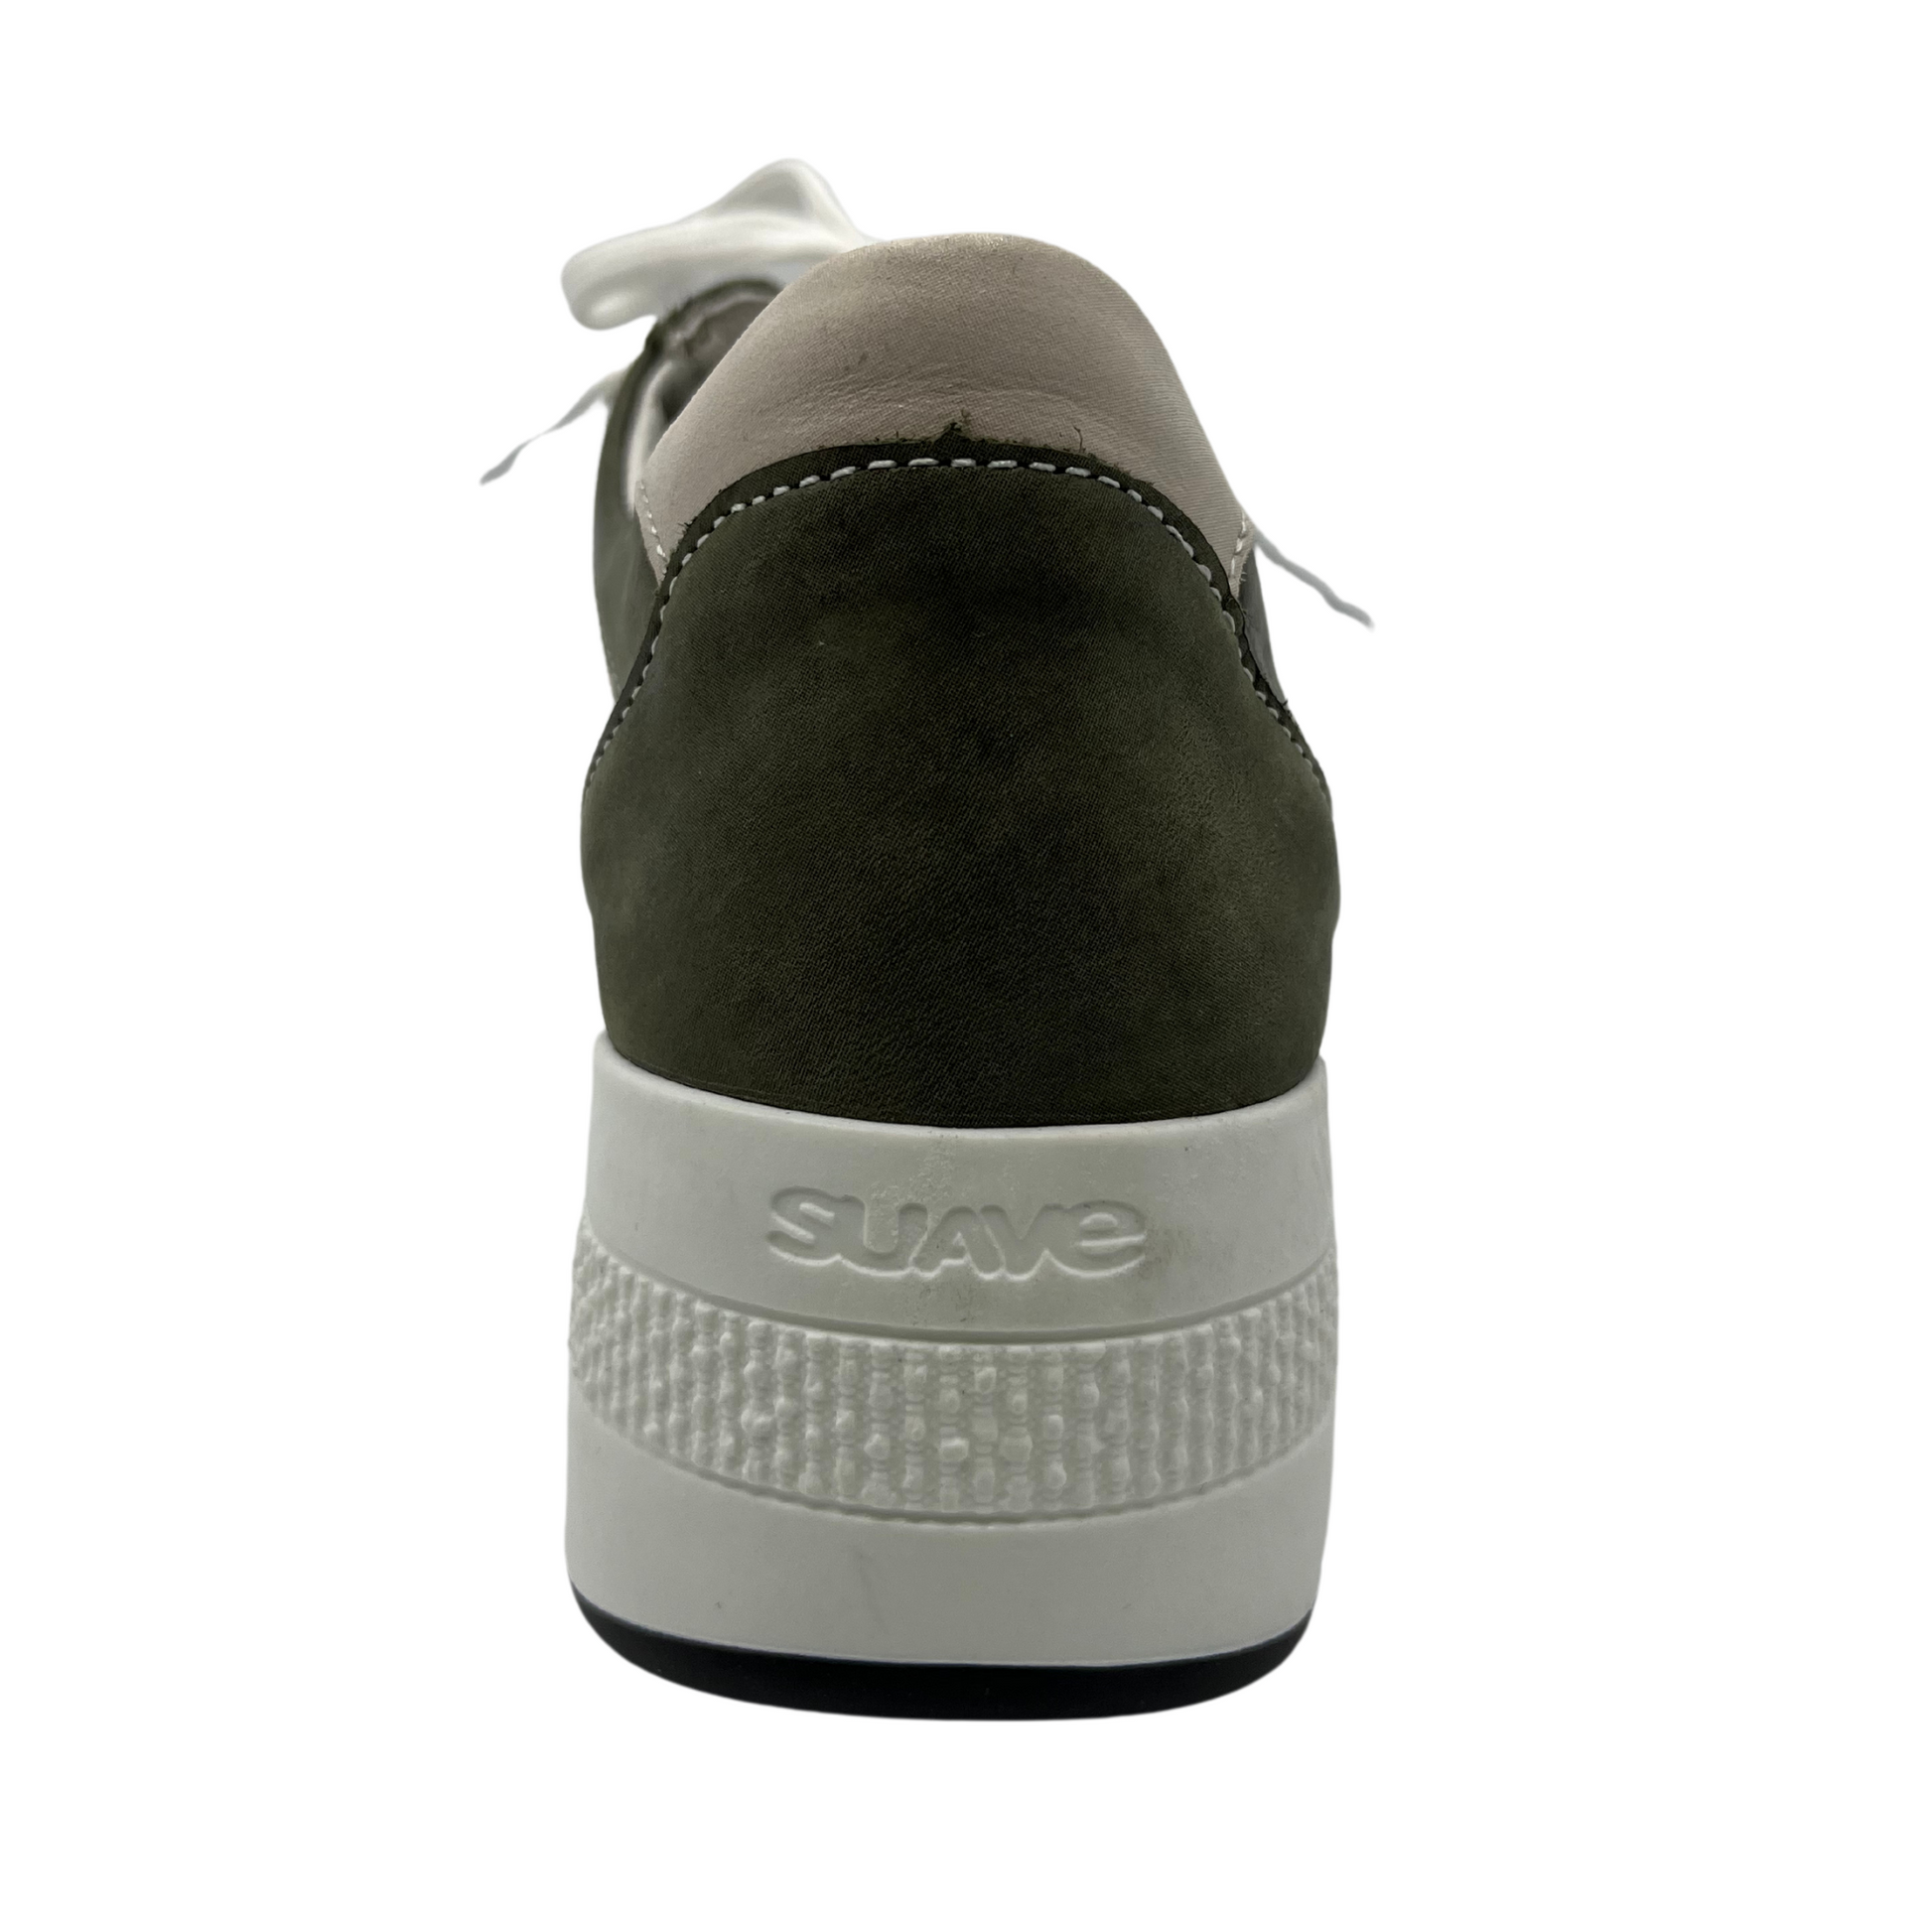 Back facing view of women's wedge sole sneaker with white rubber outsole